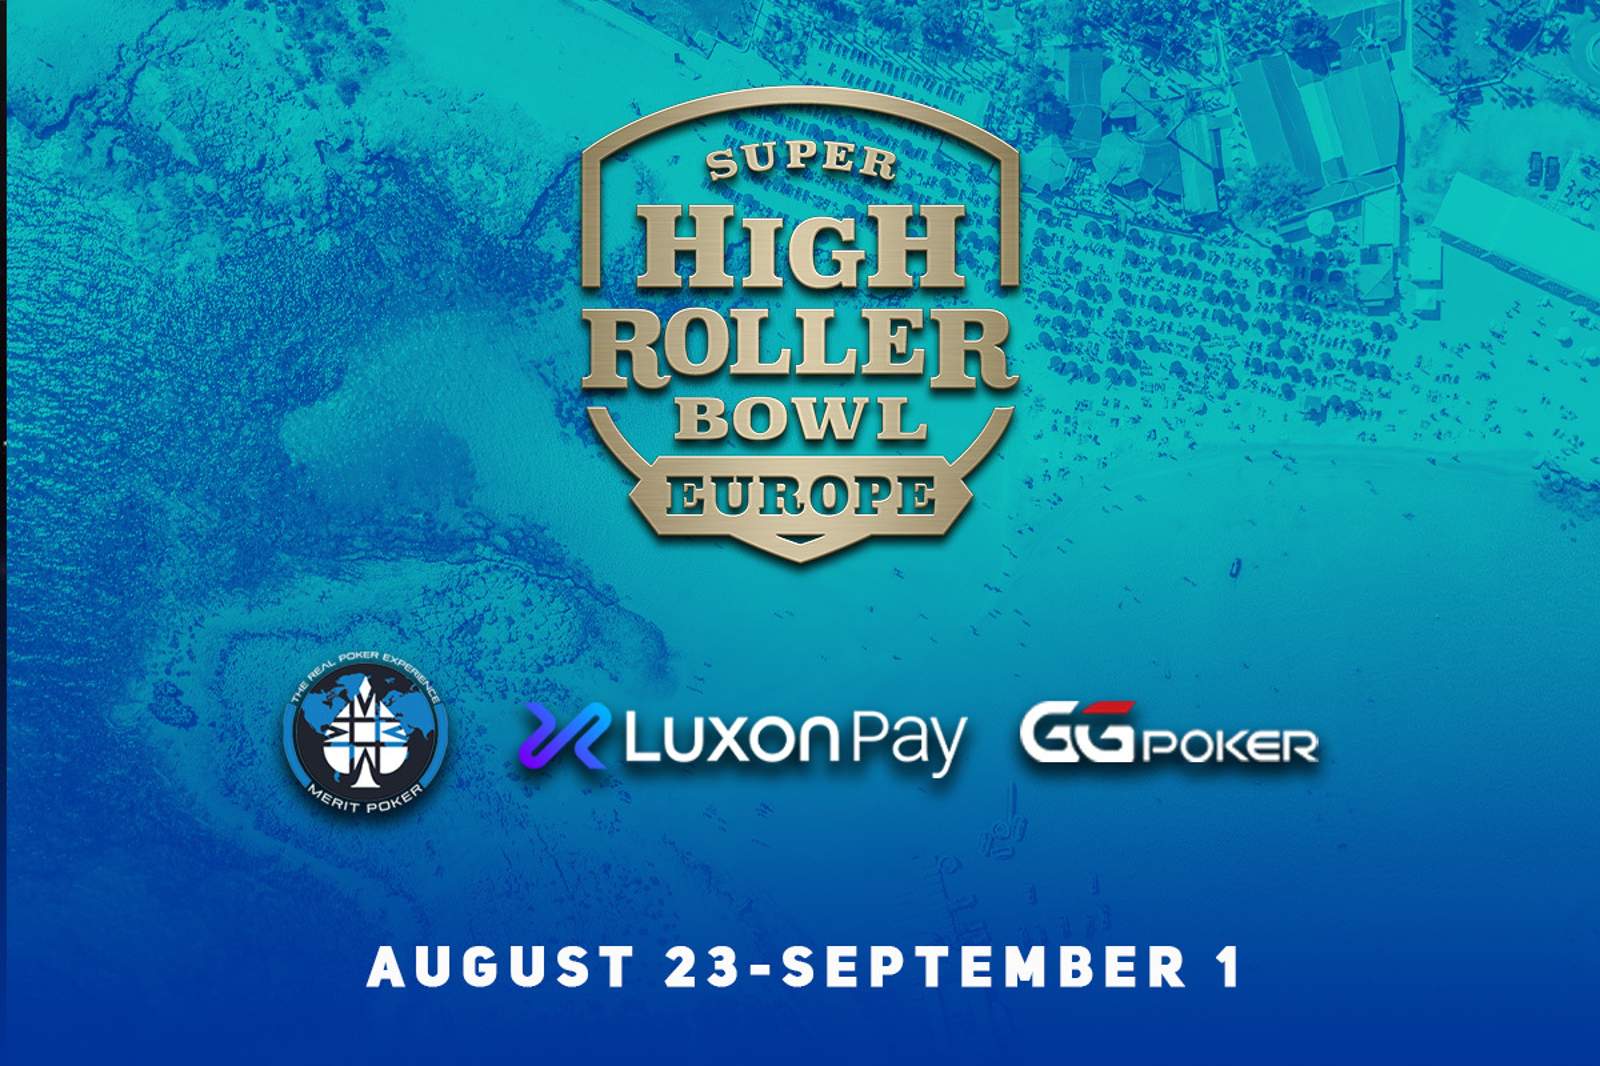 Super High Roller Bowl Europe Preview: Schedule, History, and More